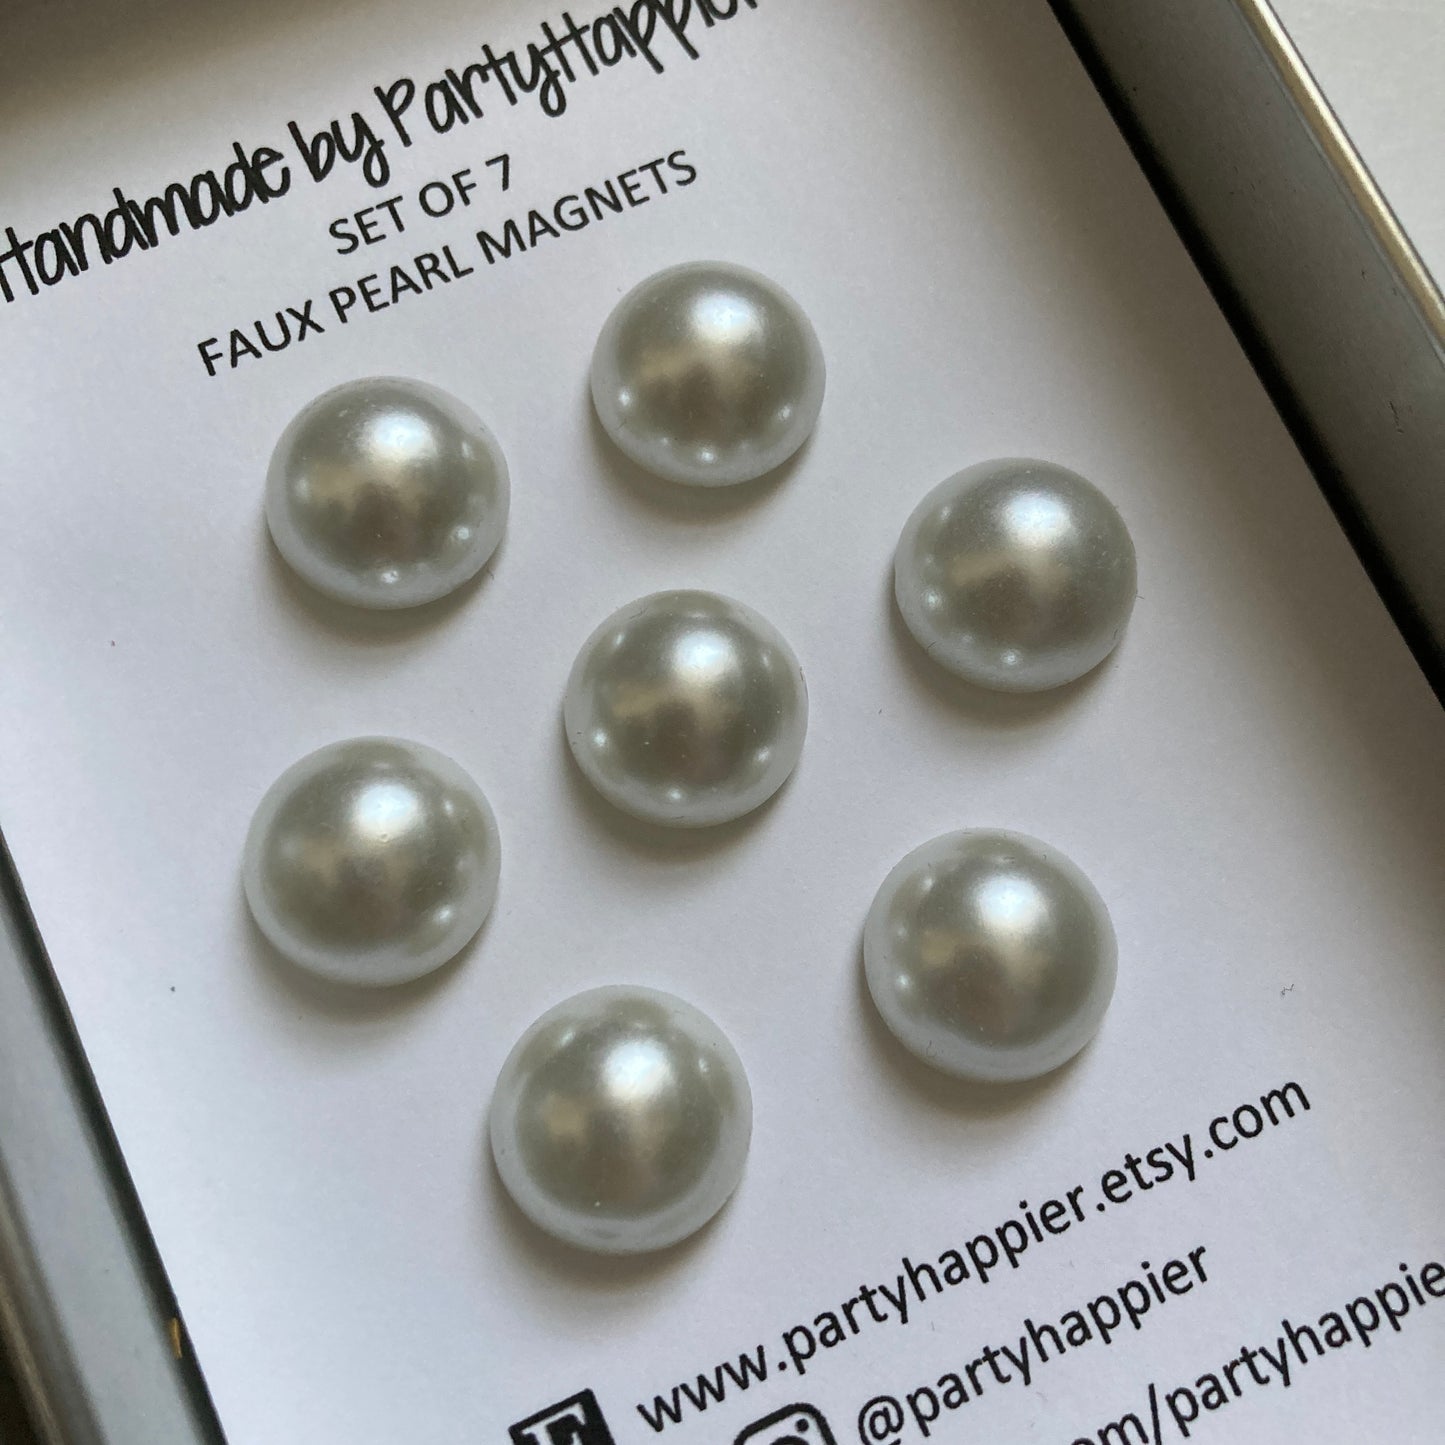 Faux Pearl Magnets